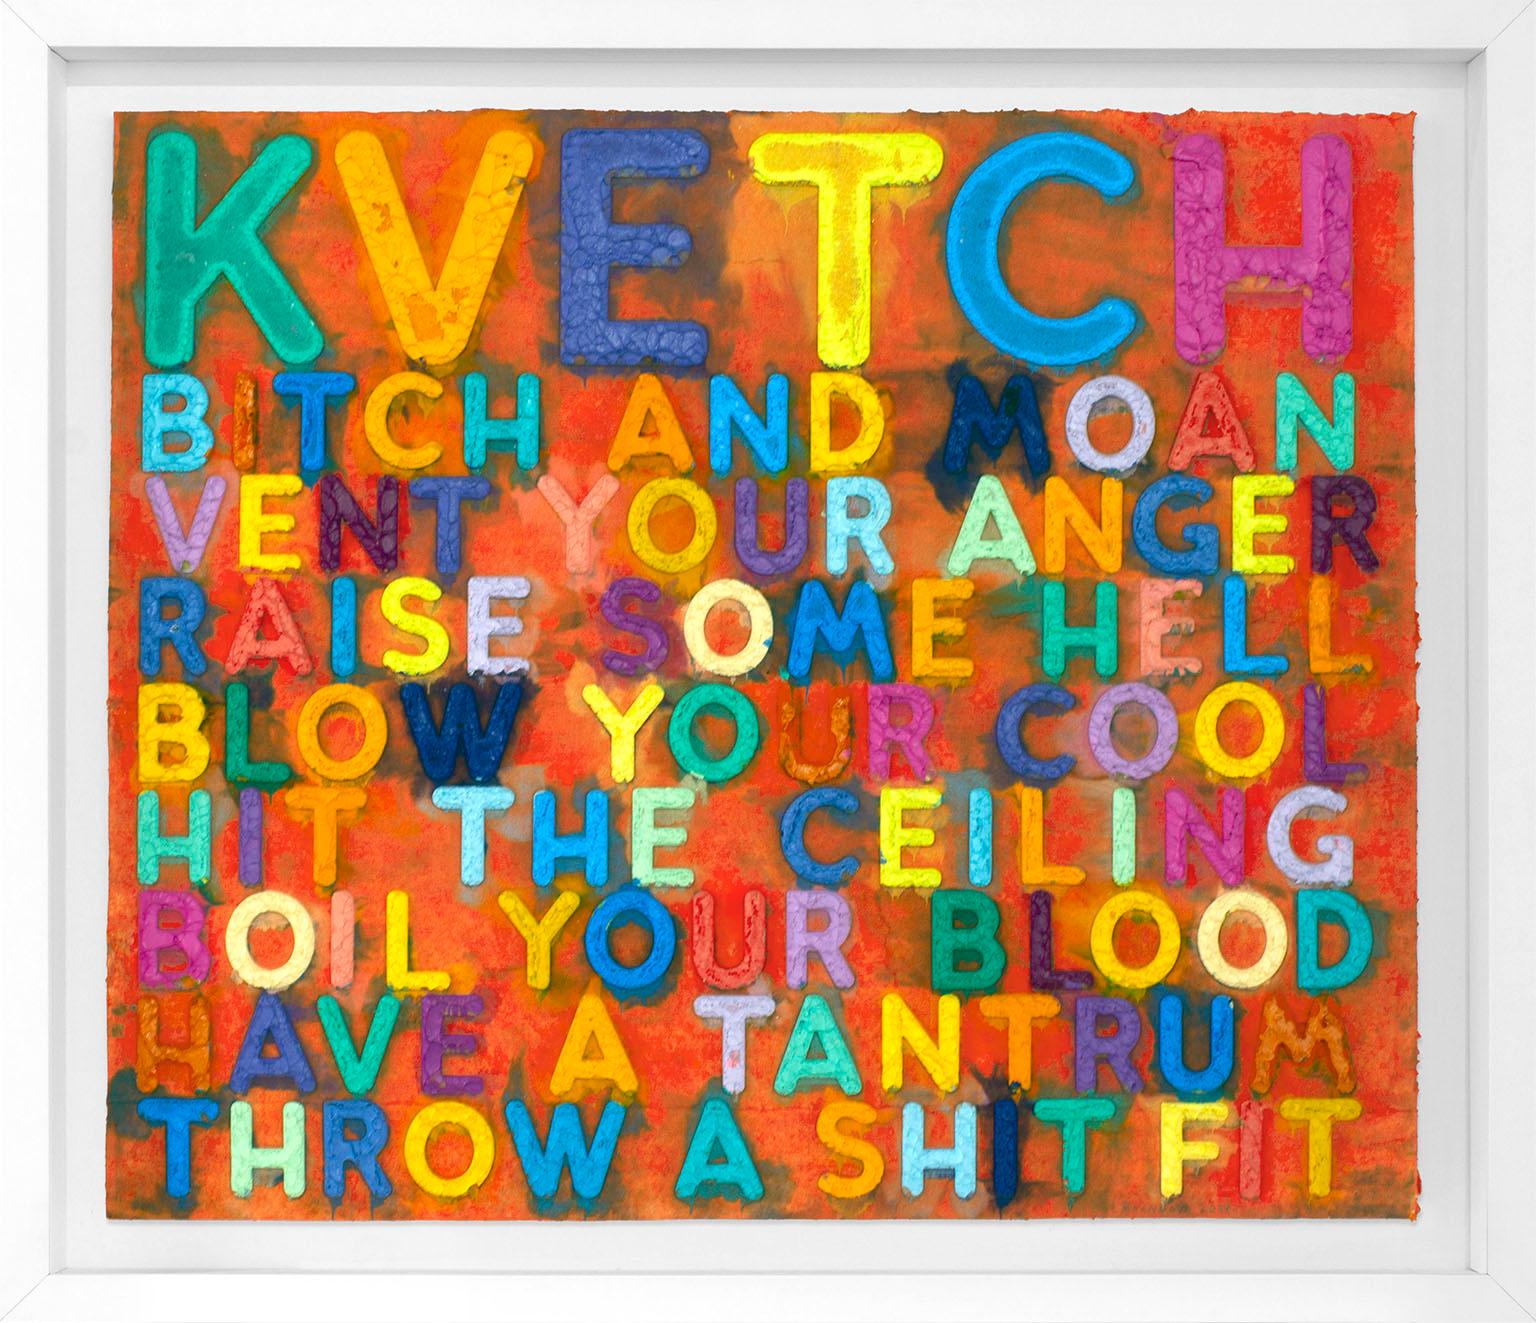 "Kvetch" monoprint in oil with collage, engraving and embossment by Mel Bochner